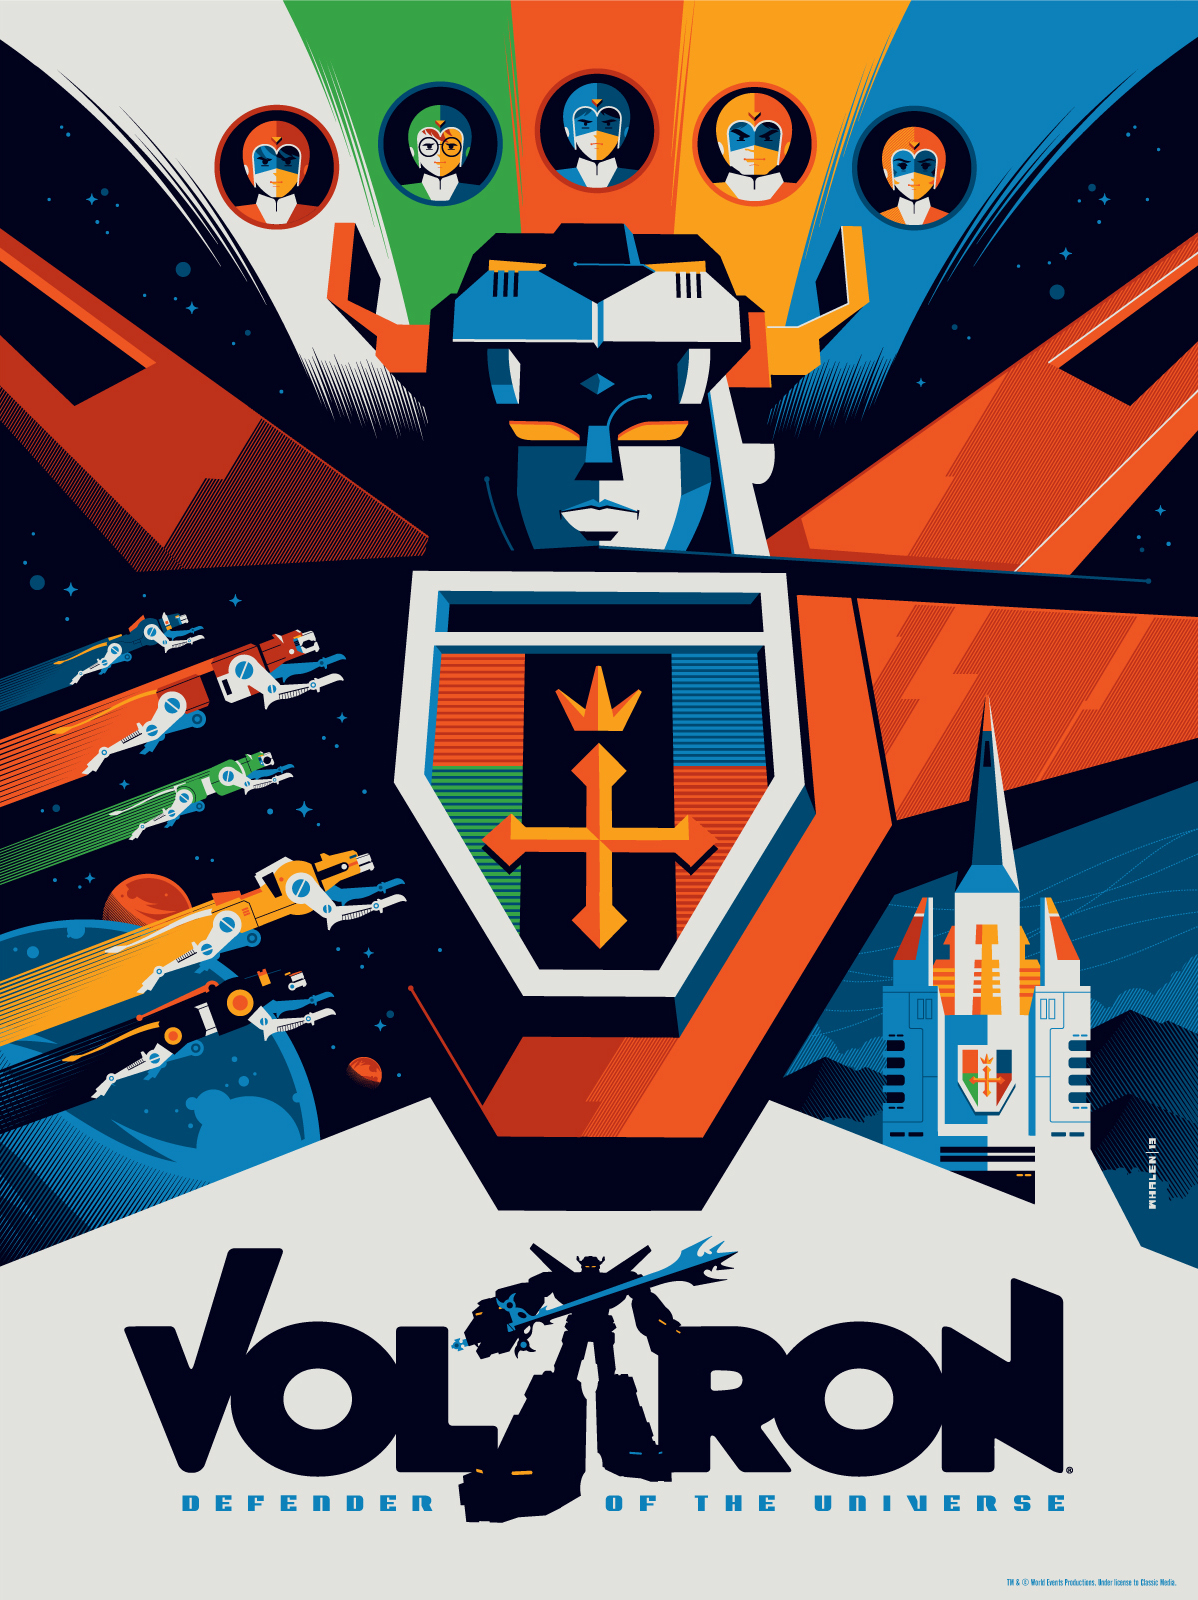 Voltron poster by Tom Whalen (Image: Tom Whalen)